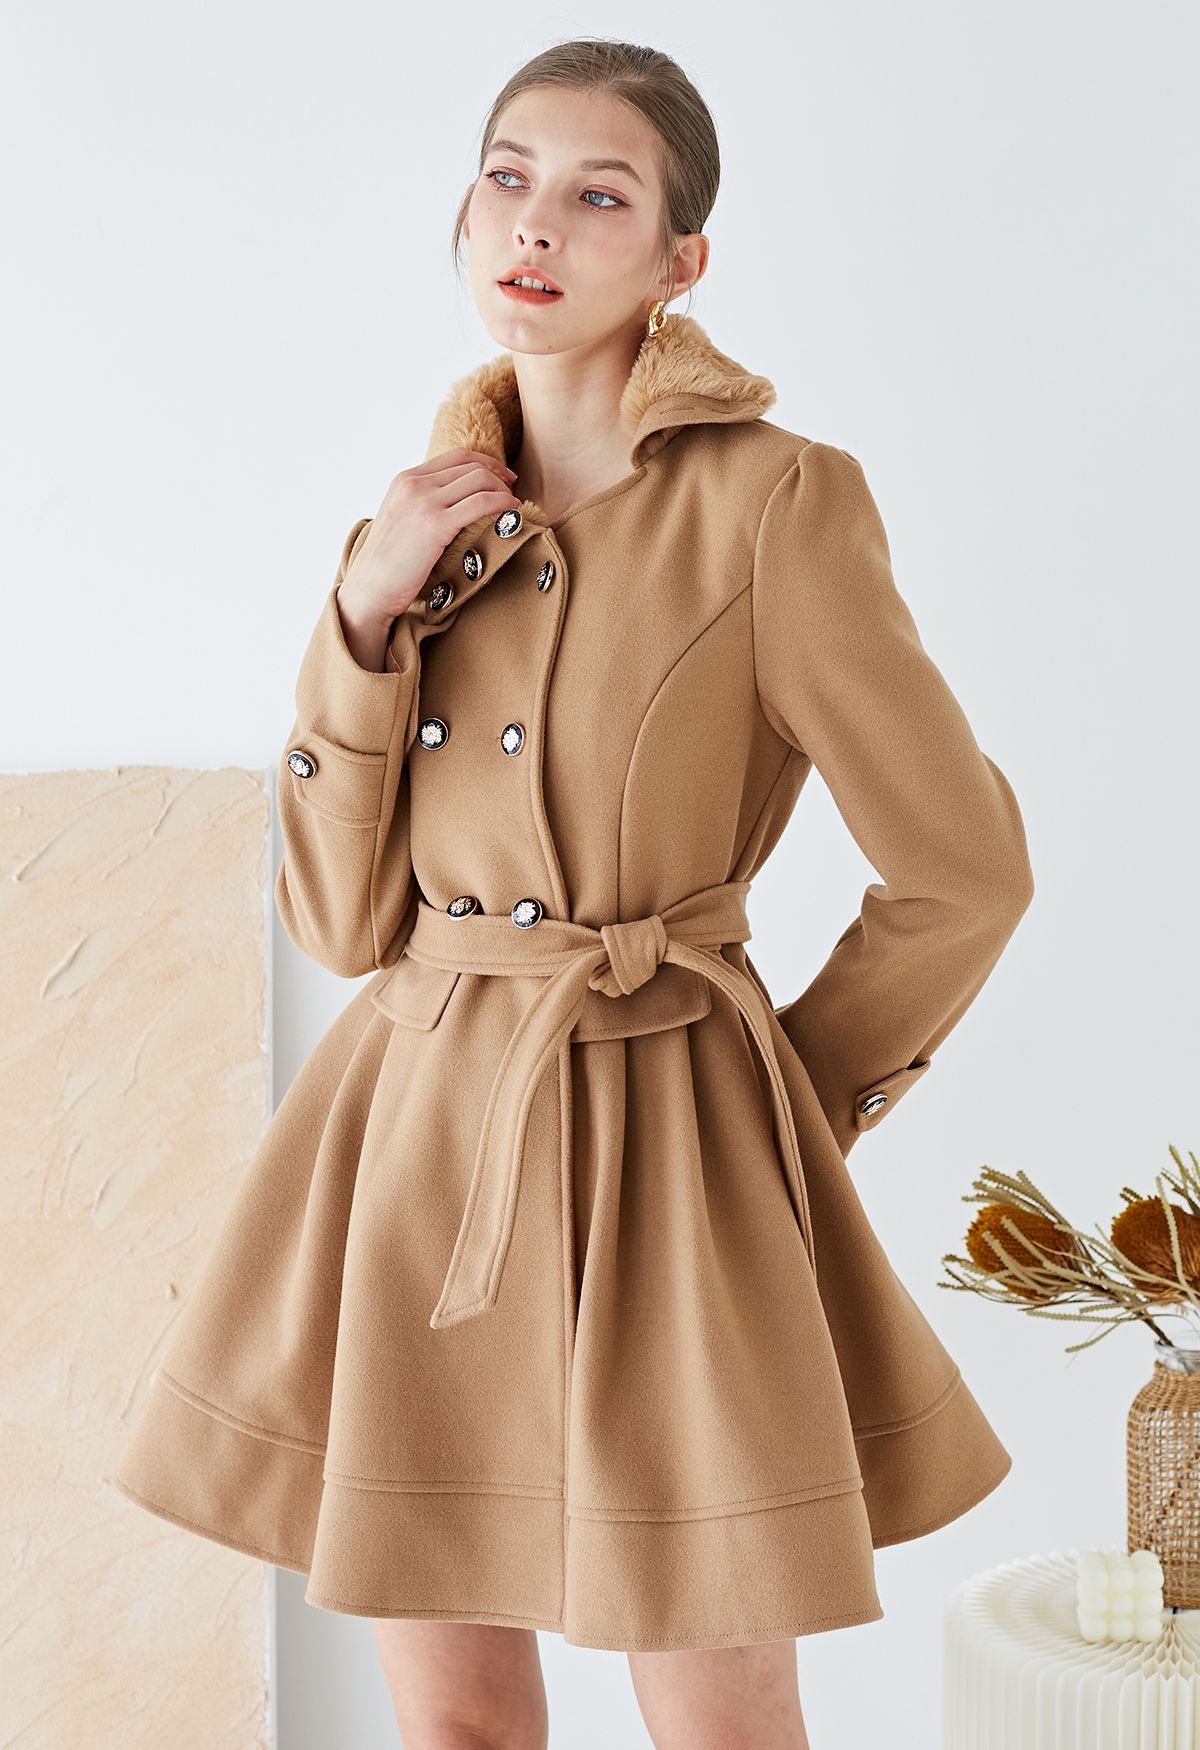 Faux Fur Double-Breasted Skater Coat in Tan - Retro, Indie Unique Fashion